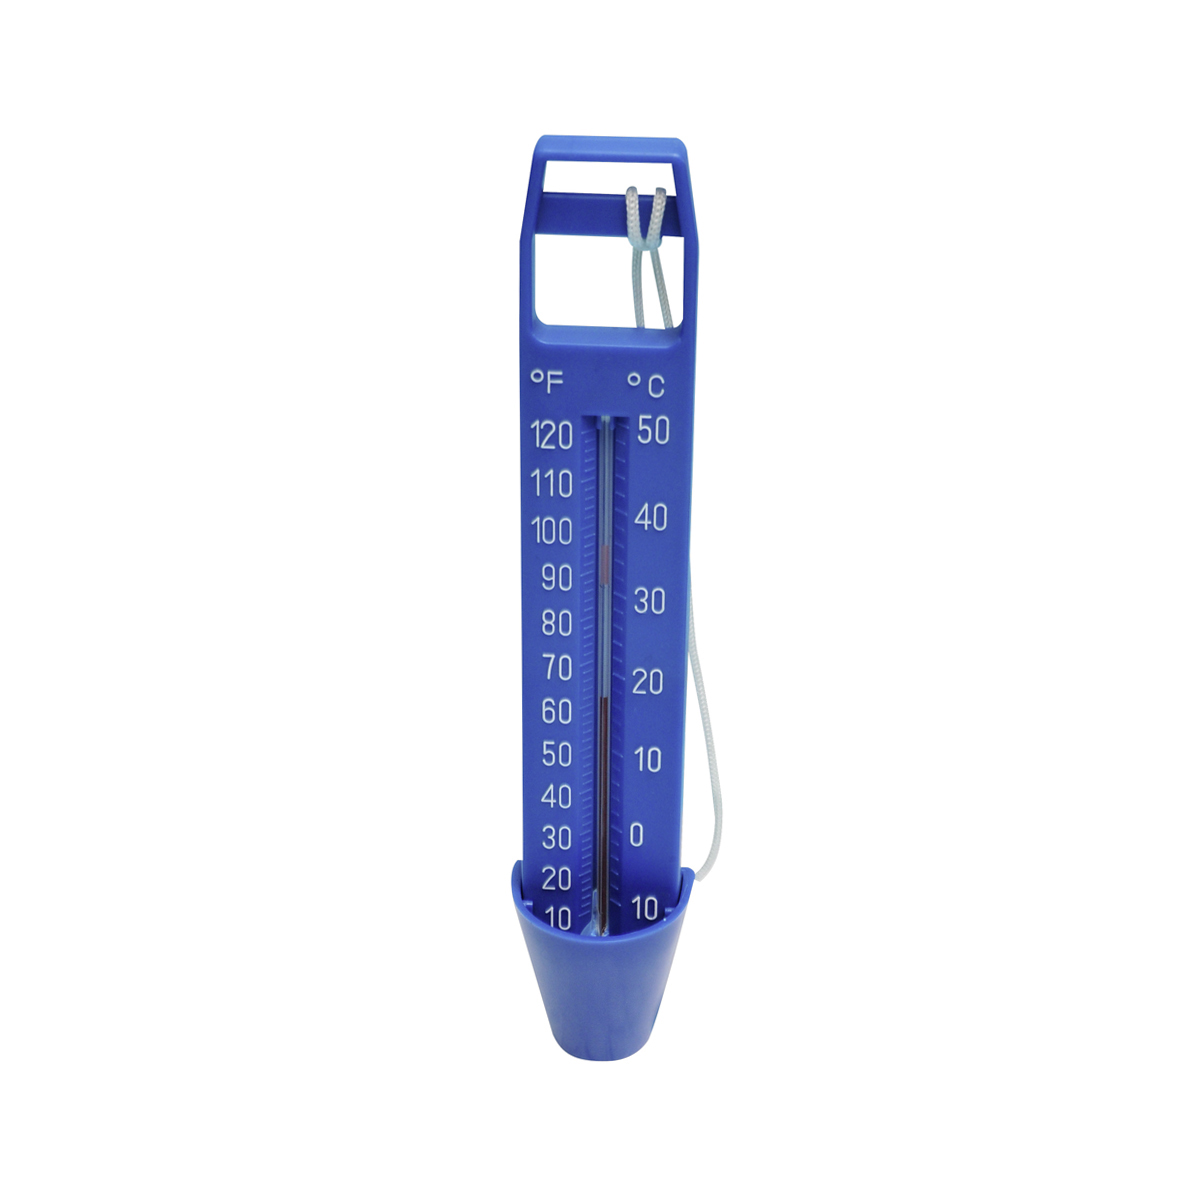 Smart pool thermometer blue 17 cm Smart pool thermometer blue 17 cm